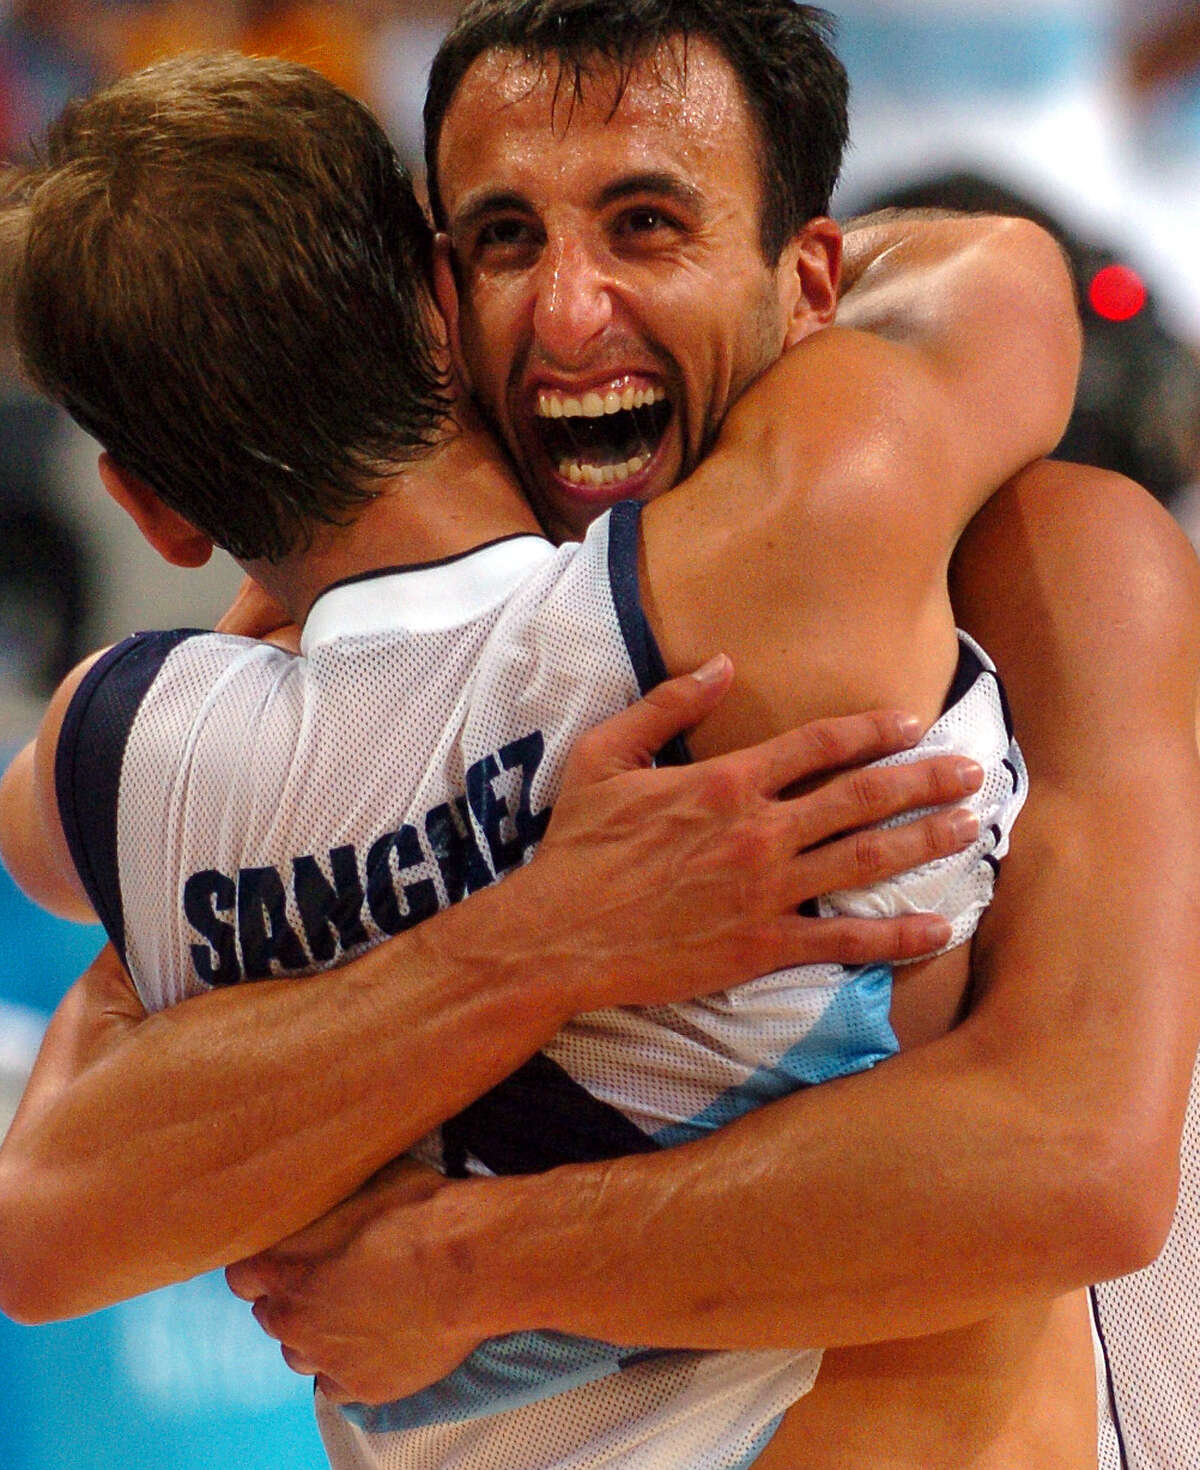 Argentina's Manu Ginobili, facing camera, hugs teammate Juan Ignacio Sanchez Thursday Aug. 26, 2004 in Athens, Greece after Argentina beat the U.S. team 89-81 to advance to the gold medal game during the XXVIII Olympiad. (WILLIAM LUTHER/STAFF)